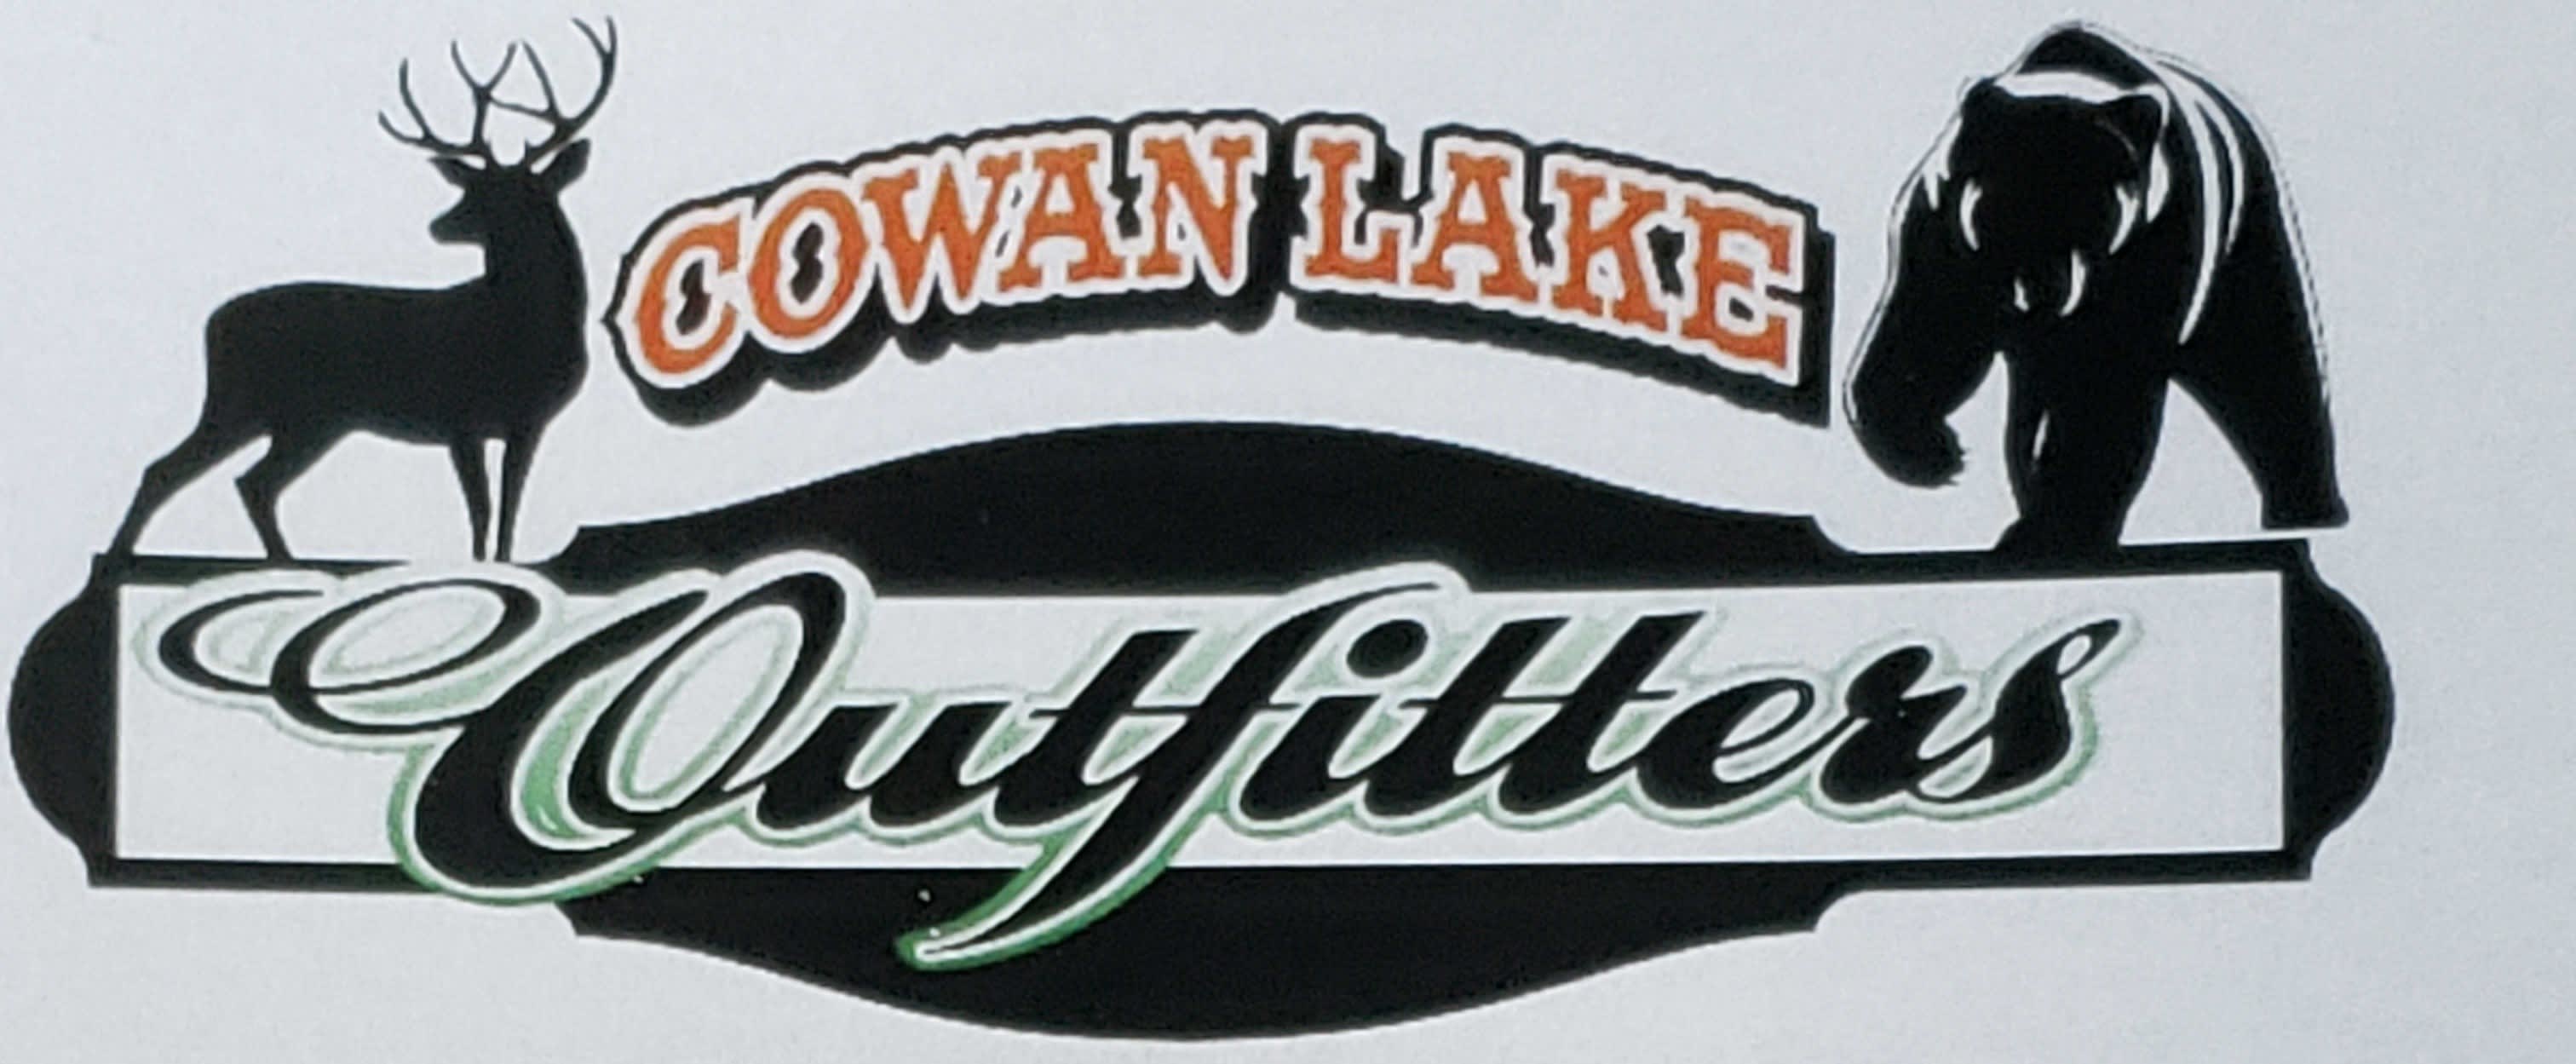 Cowan Lake Outfitters